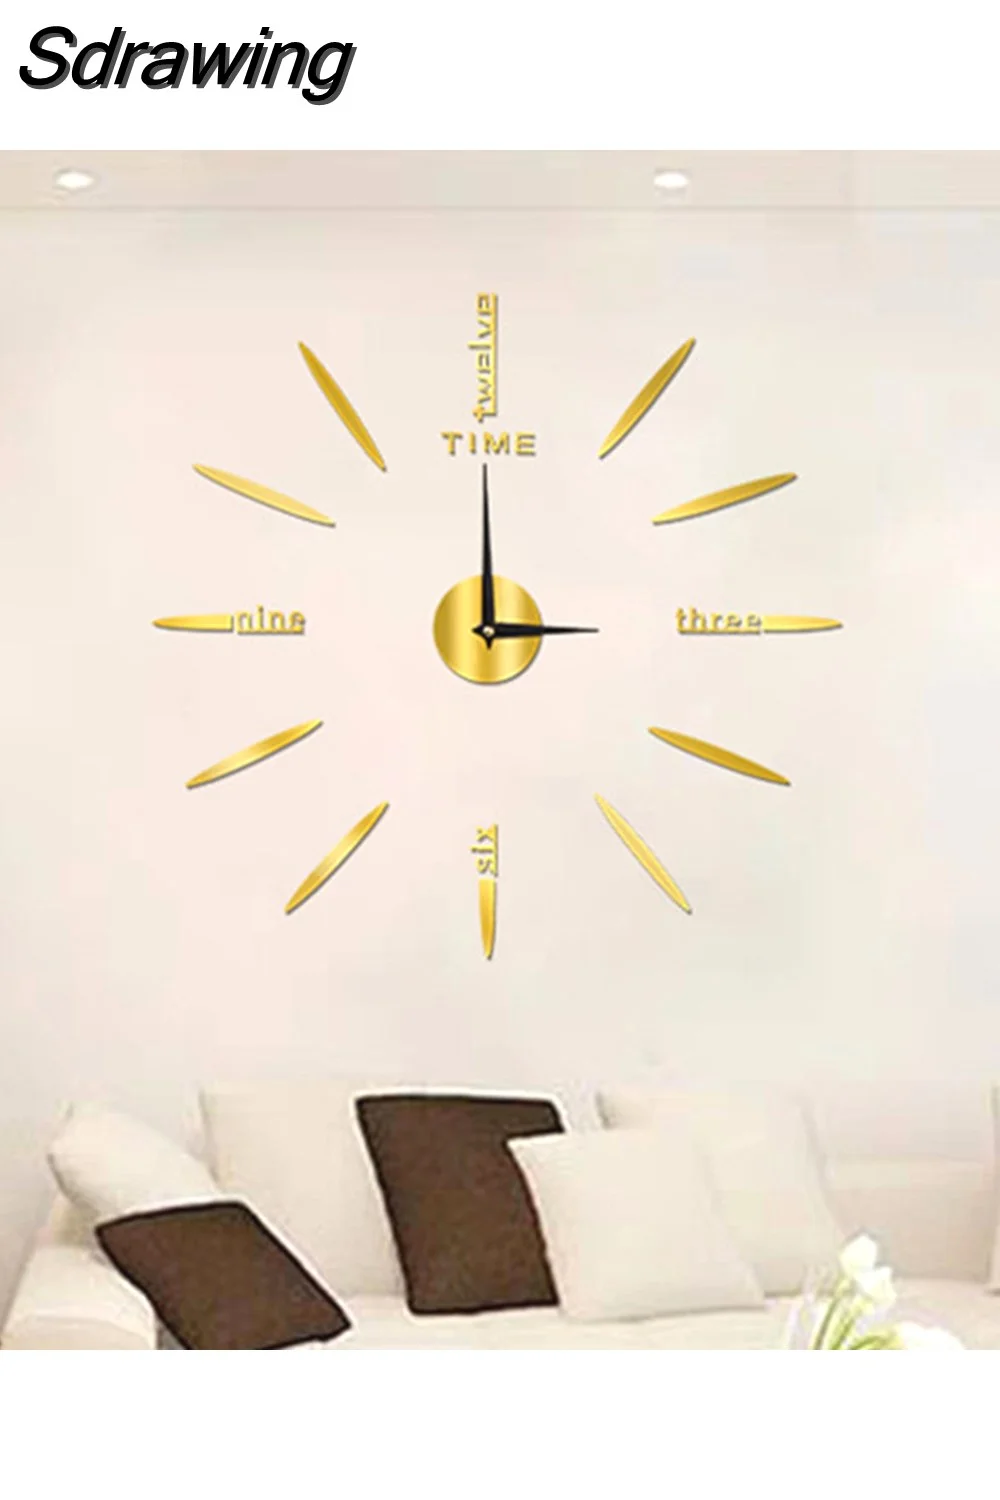 Sdrawing Home Wall Clock 3D DIY Acrylic Mirror Stickers For Home Decoration Living Room Quartz Needle Self Adhesive Hanging Watch